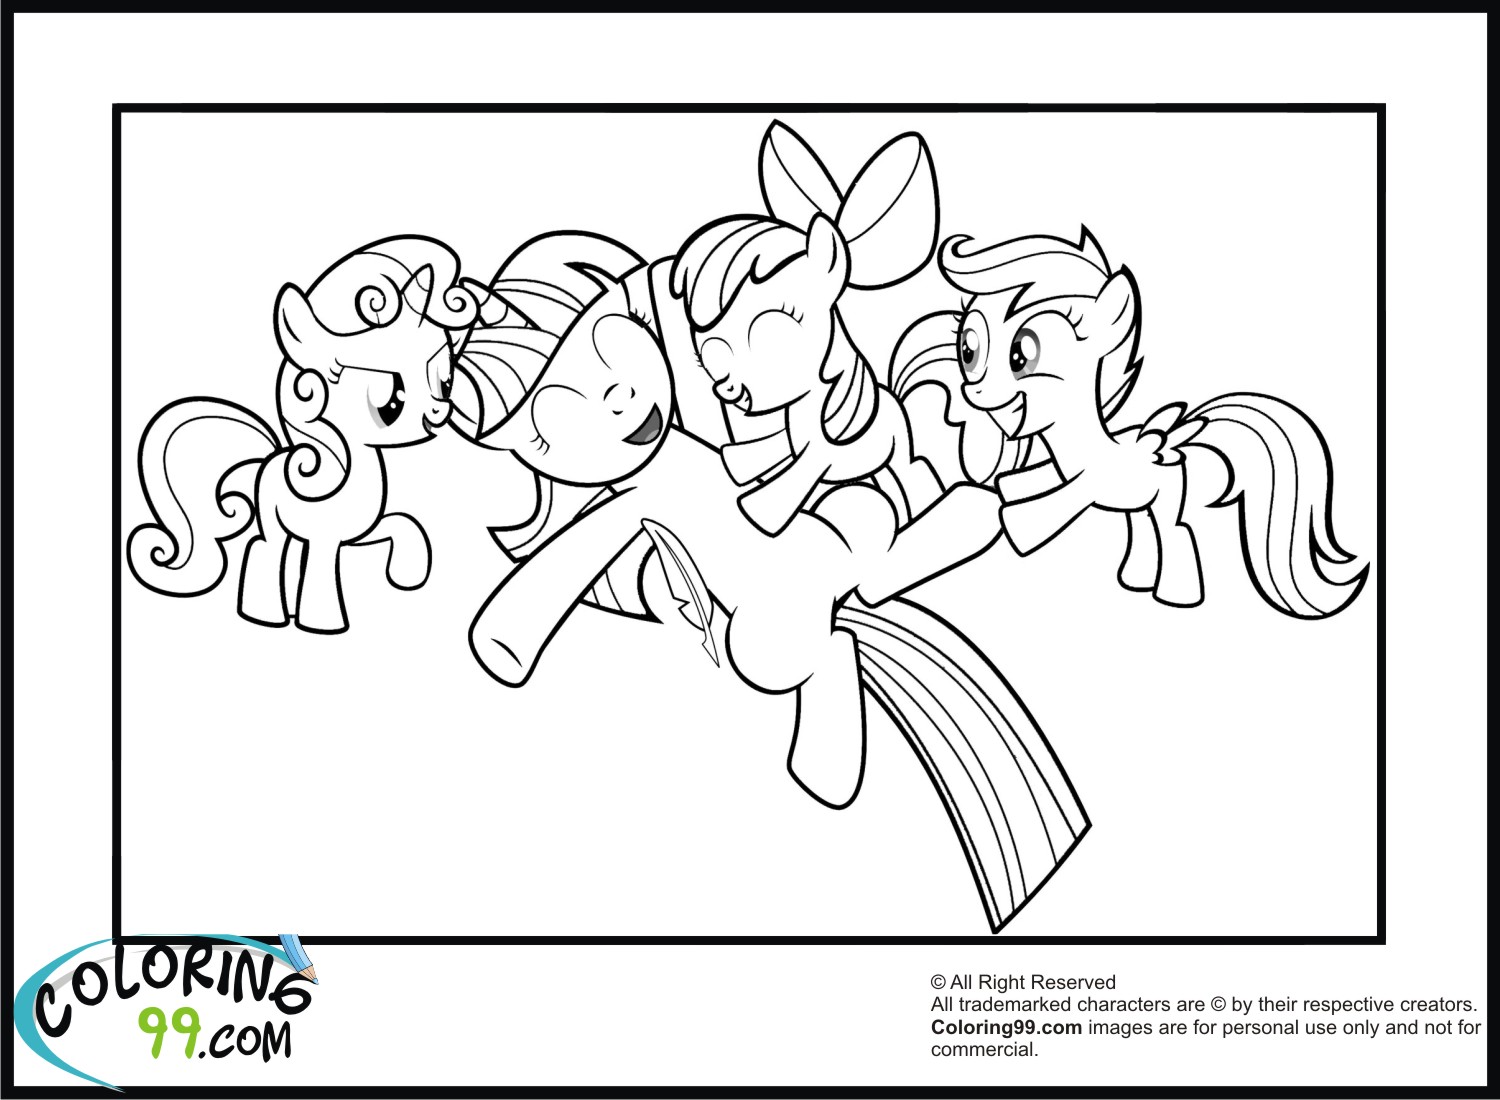 Download twilight+sparkle+playing+with+cutie+mark+crusaders.jpg (1500×1100) | My little pony coloring ...